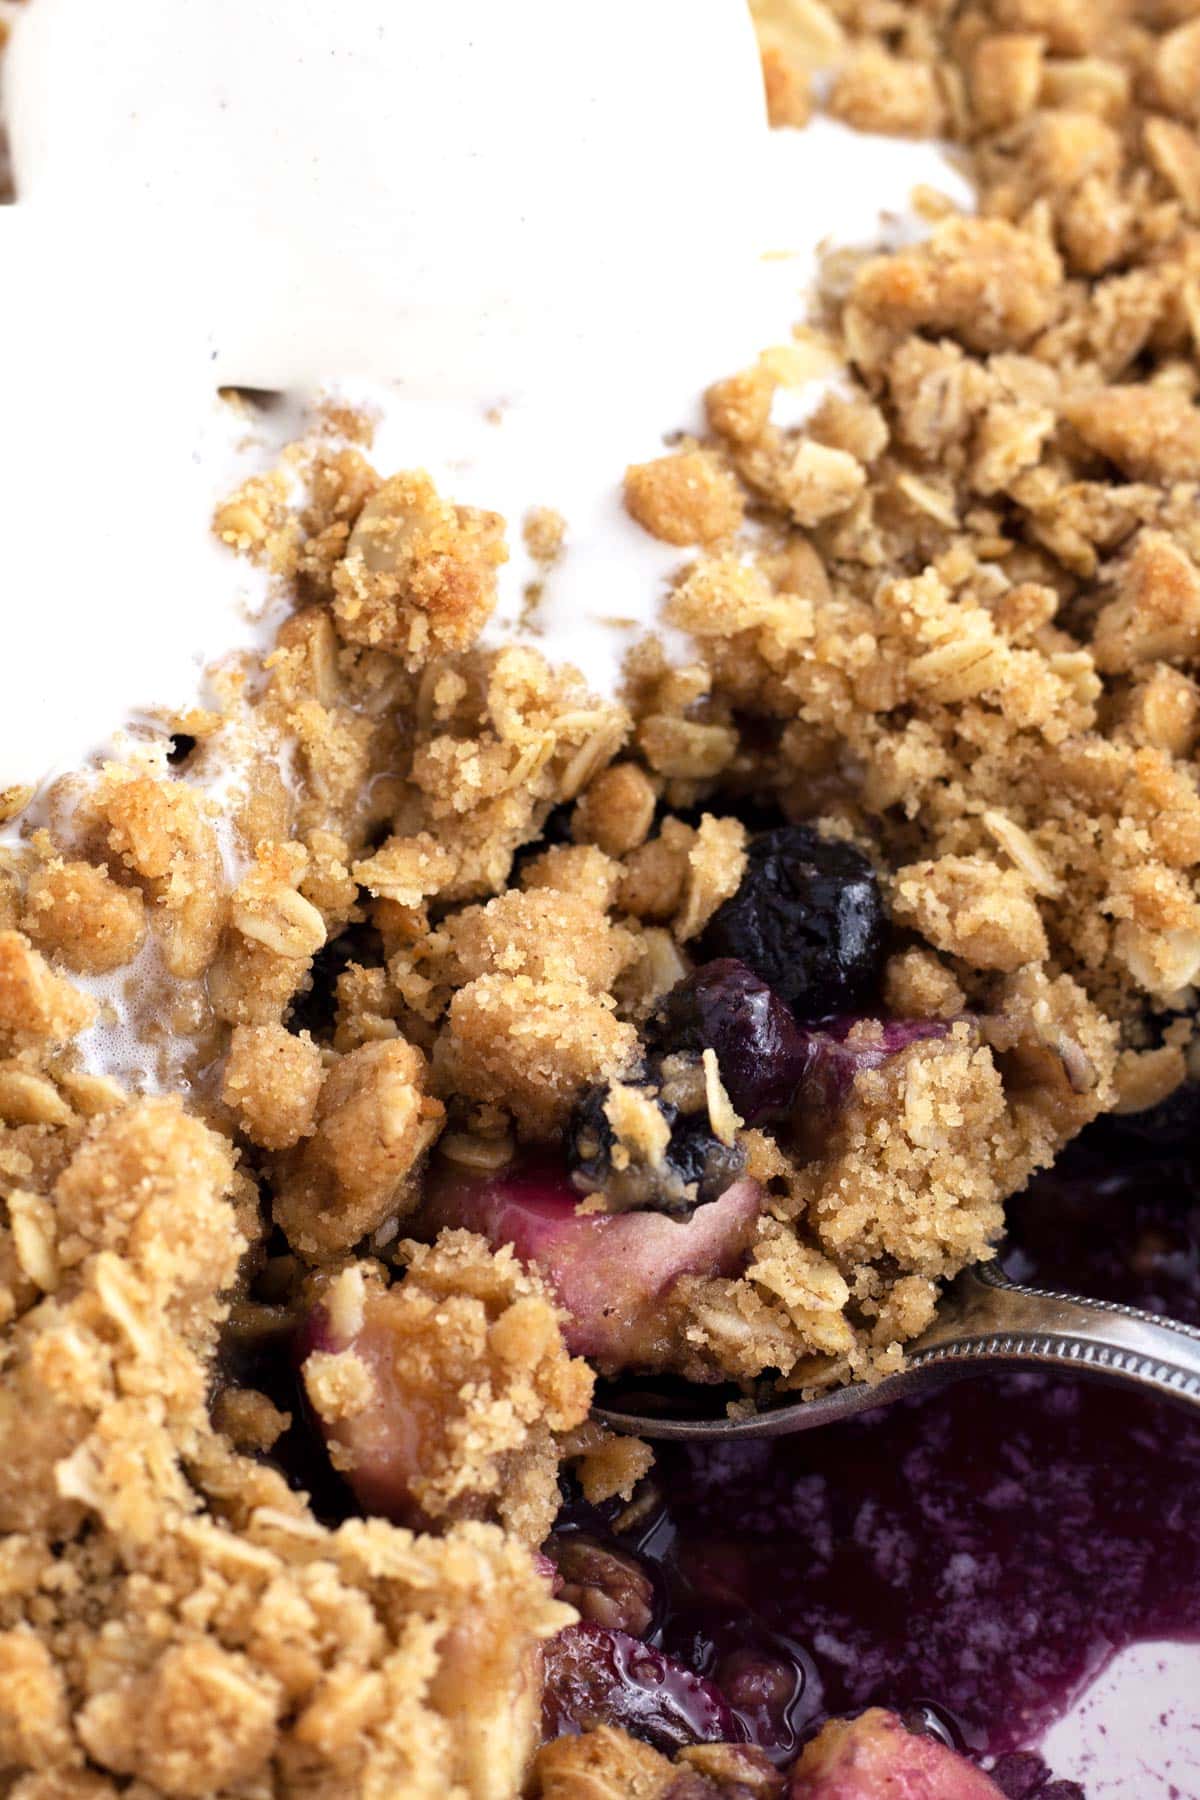 Close up of spoon scooping apple and blueberry crumble from a baking dish.